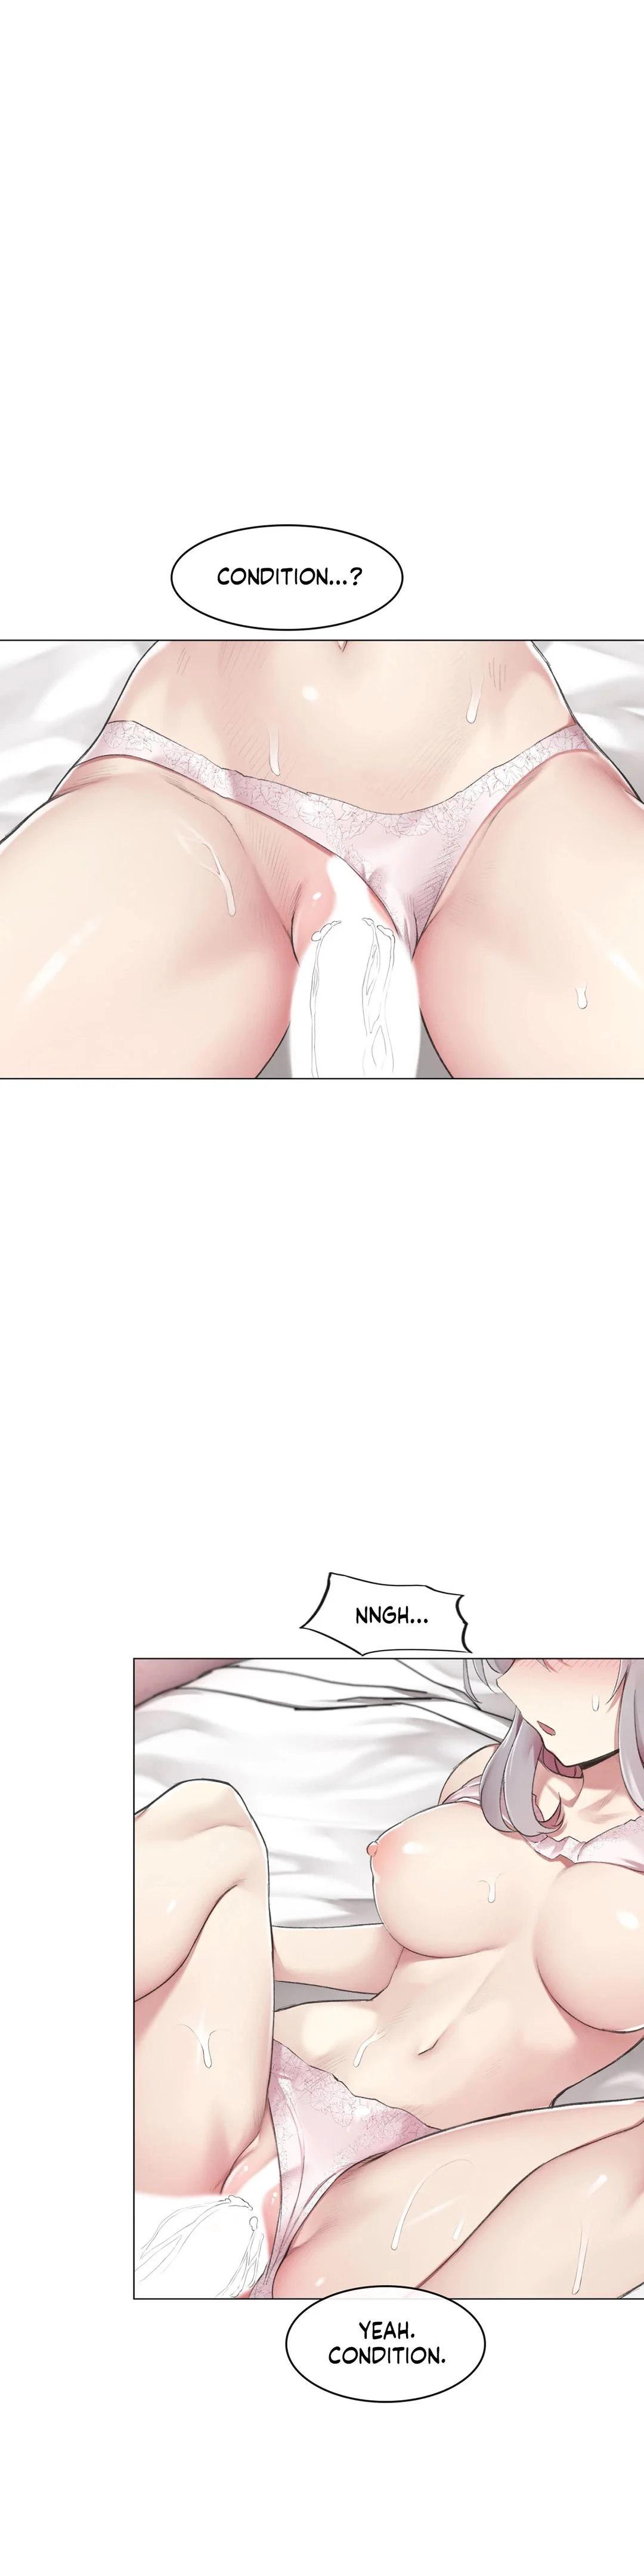 [Dumangoon, KONG_] Sexcape Room: Snap Off Ch.7/7 [English] [Manhwa PDF] Completed 104